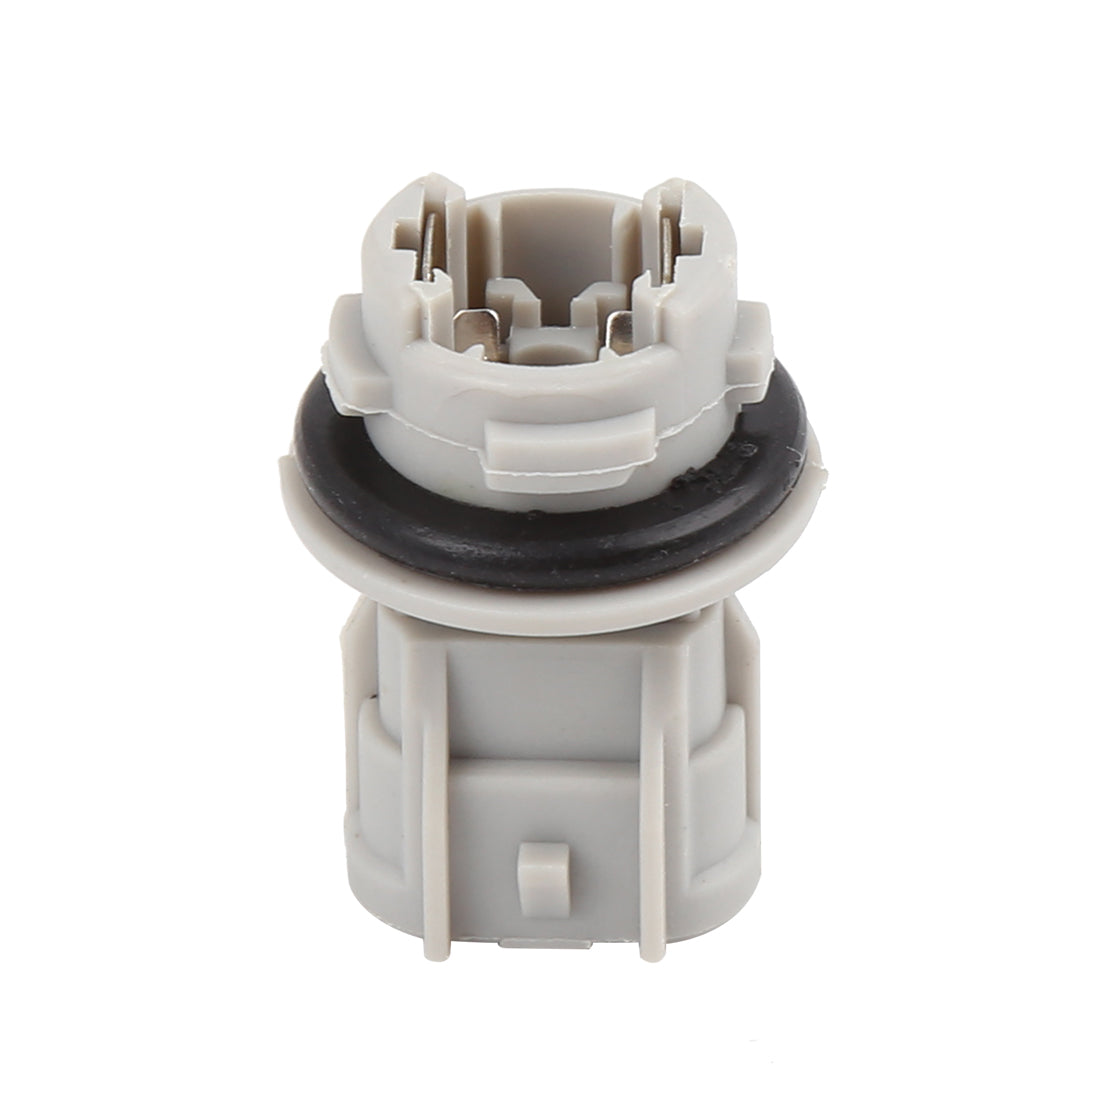 X AUTOHAUX Car Width Lamp Socket Adapter Connector Harness Wireless Holder White